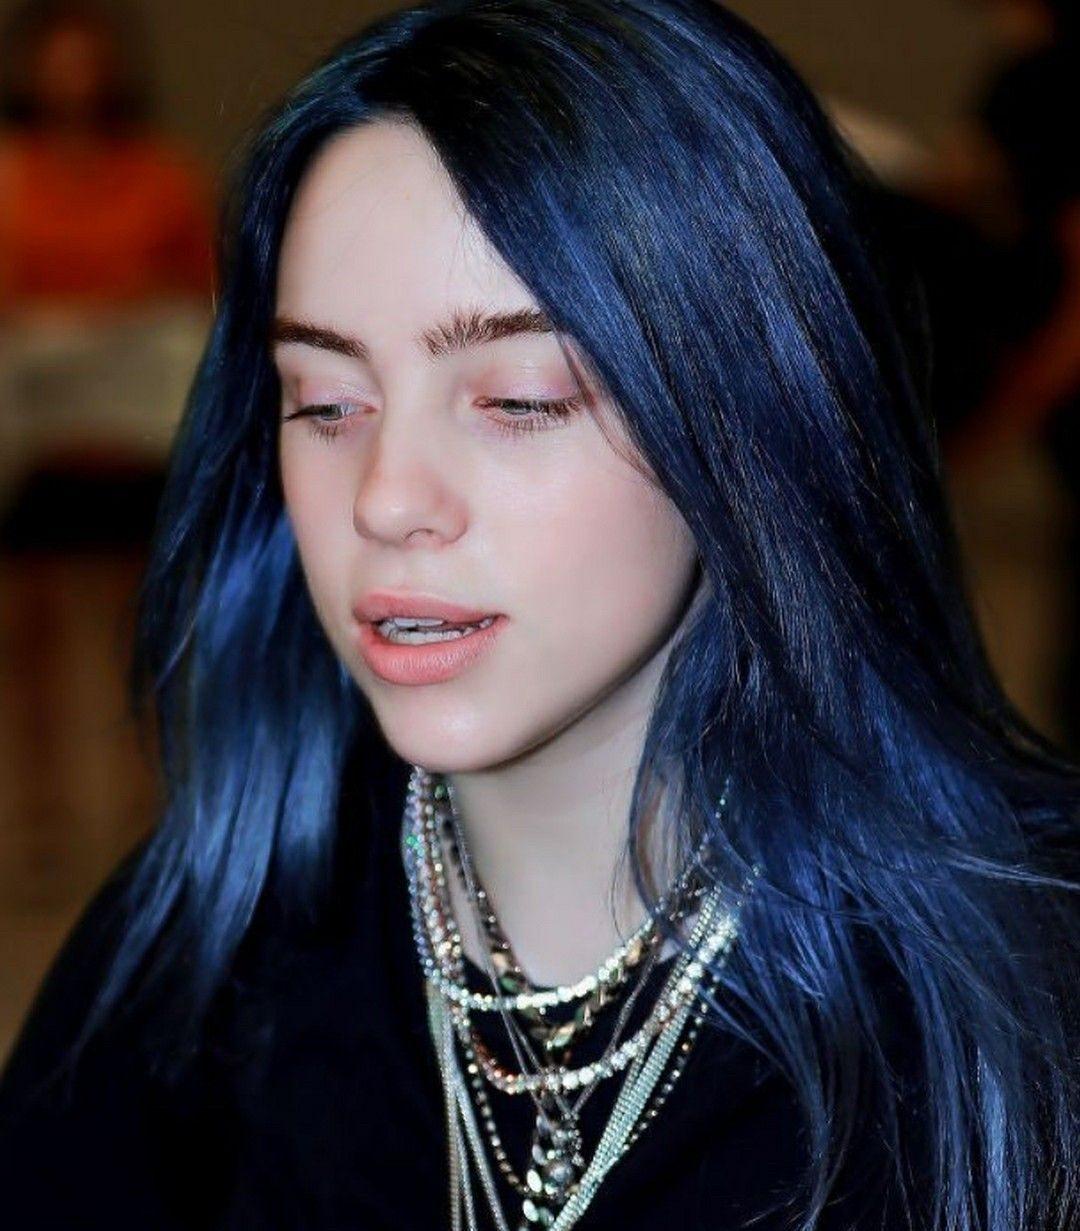 Billie Eilish S 2019 Tour Is Coming To An End Grit Daily News